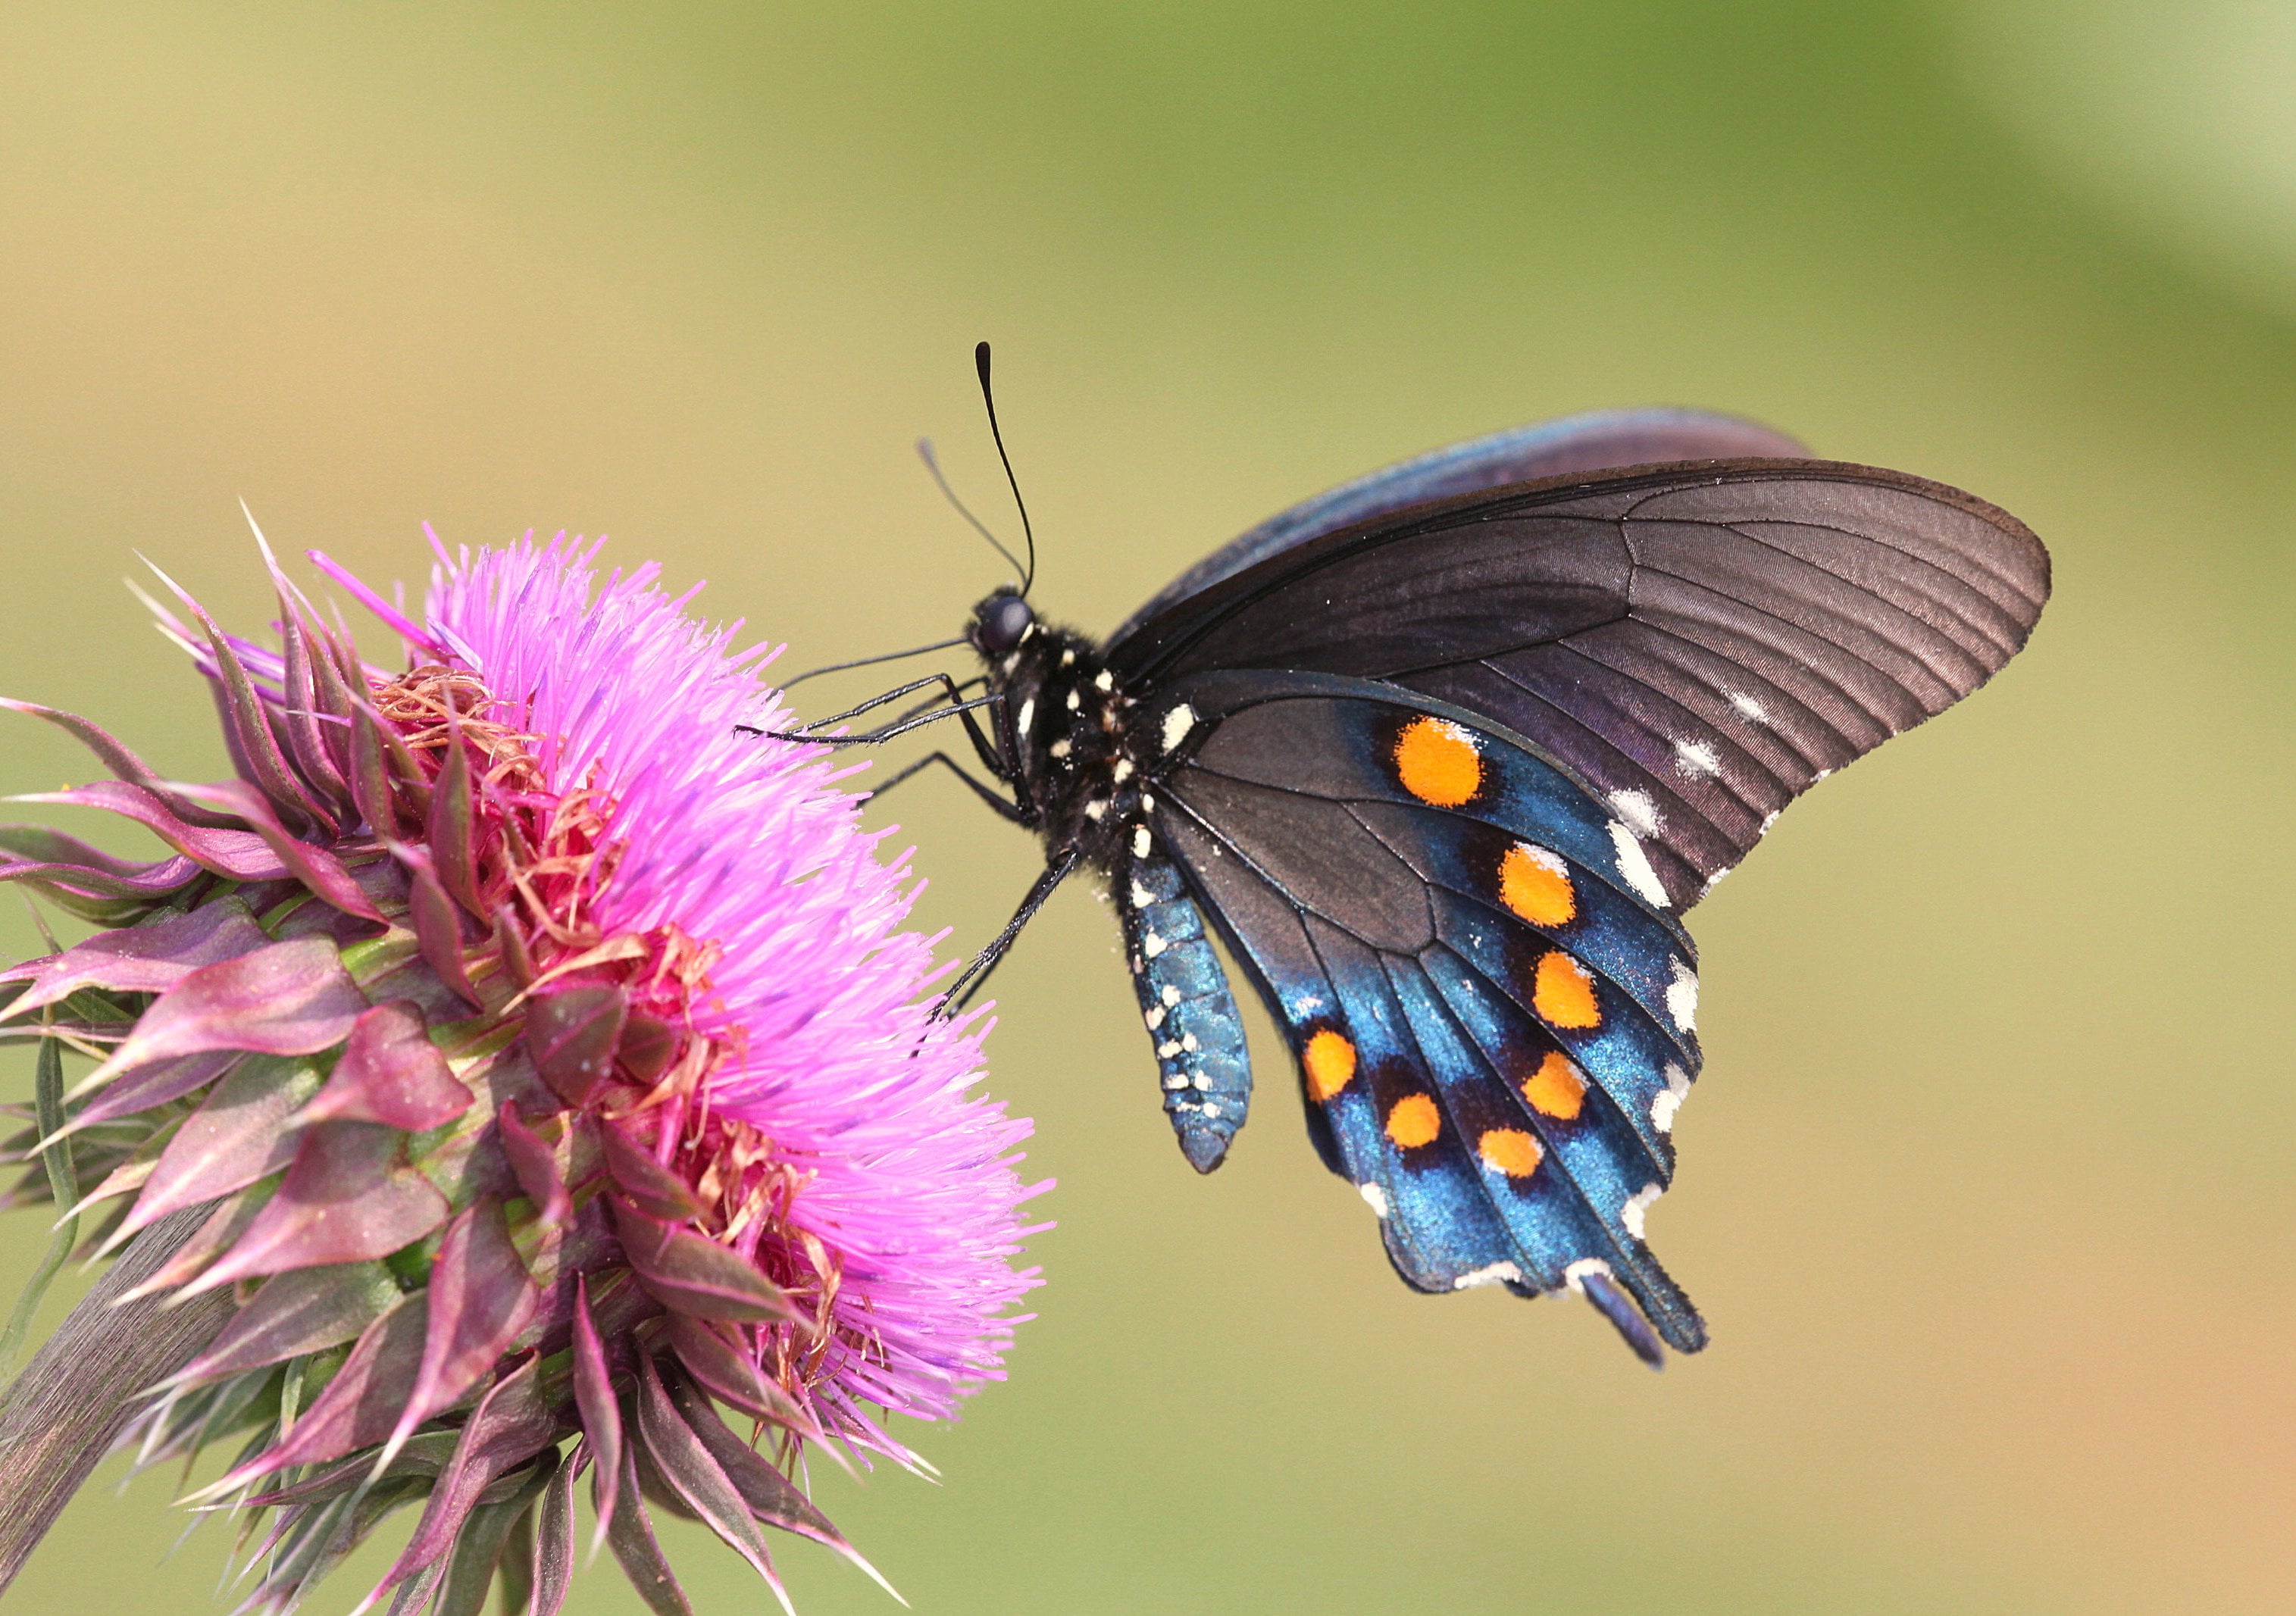 Spicebush butterfly on thistle flower during daytime, swallowtail